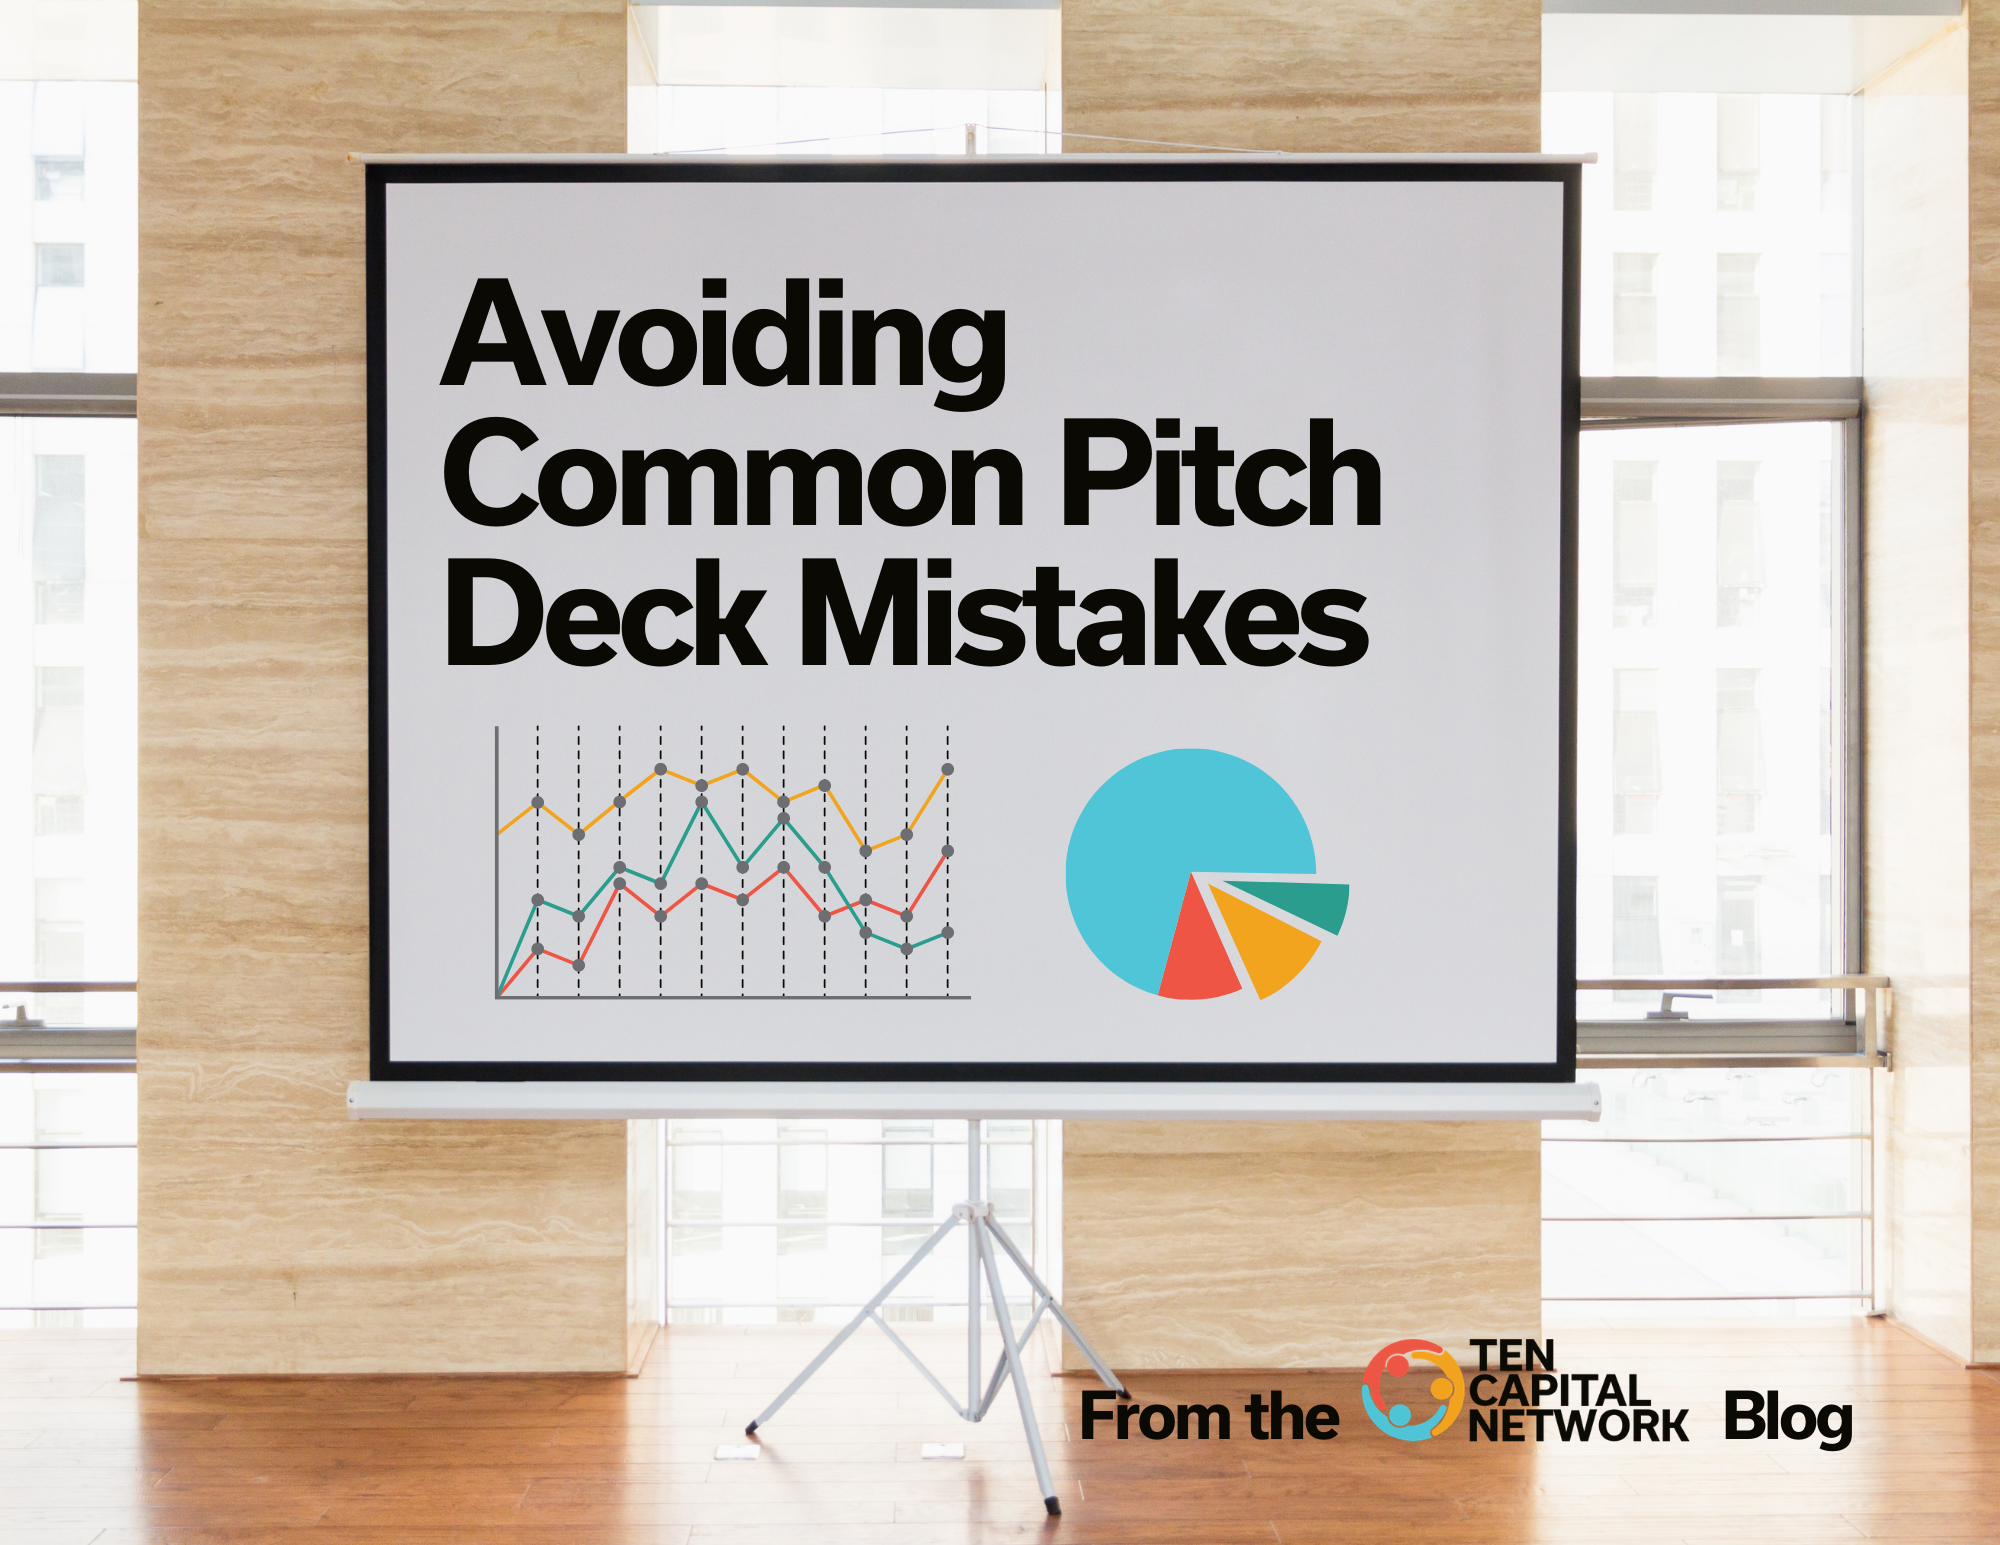 Common Pitch Deck Mistakes